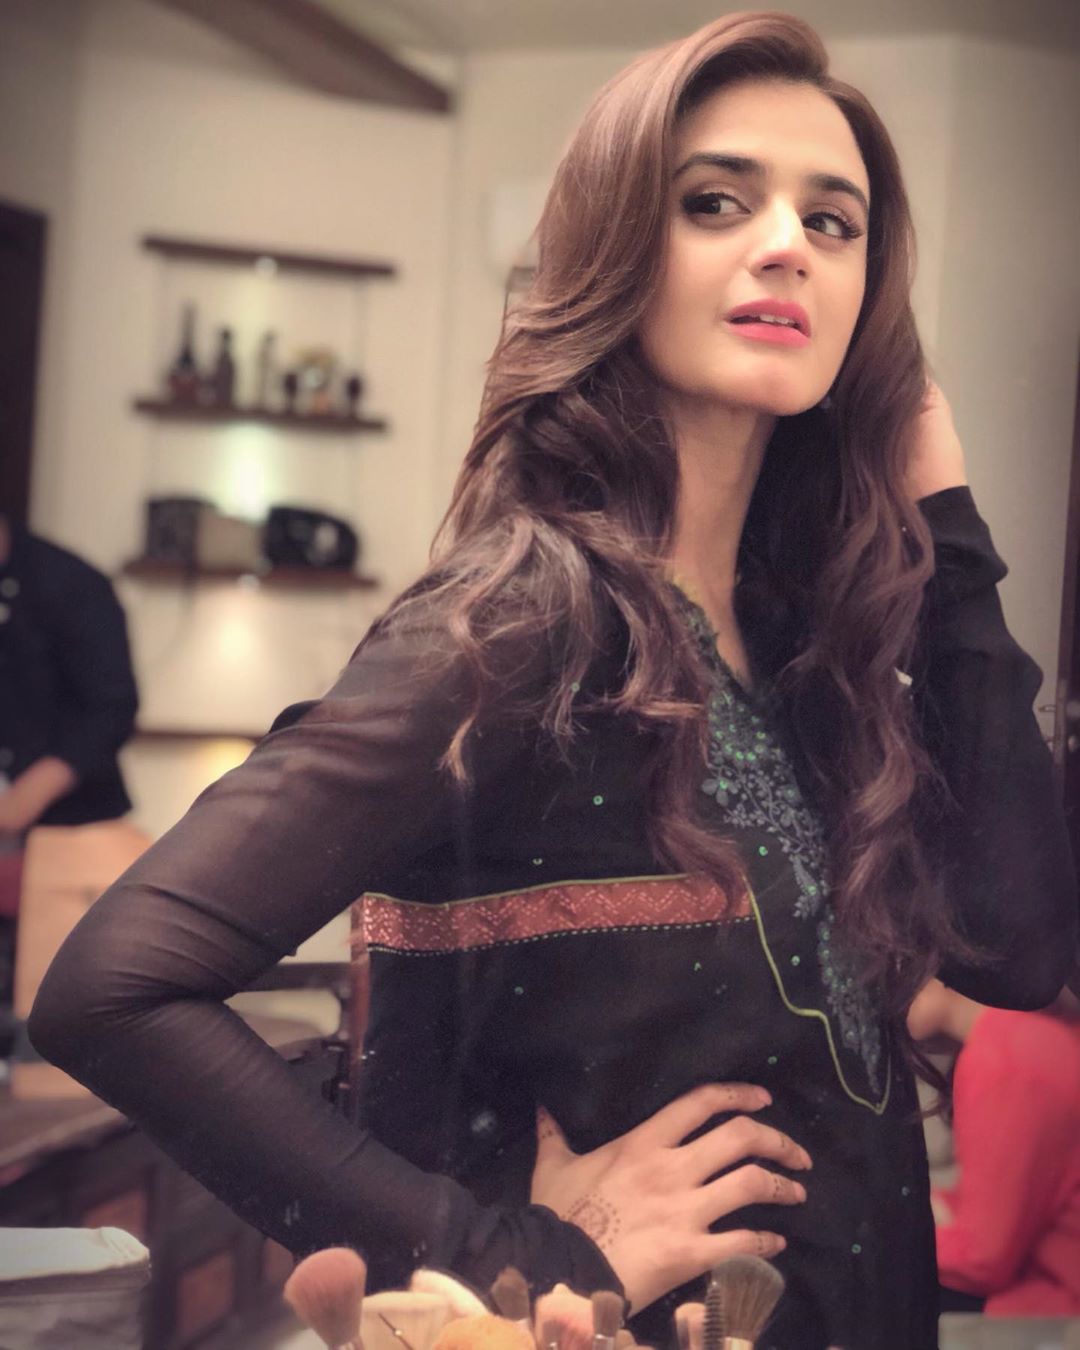 Some Latest Pictures of Actress Hira Mani